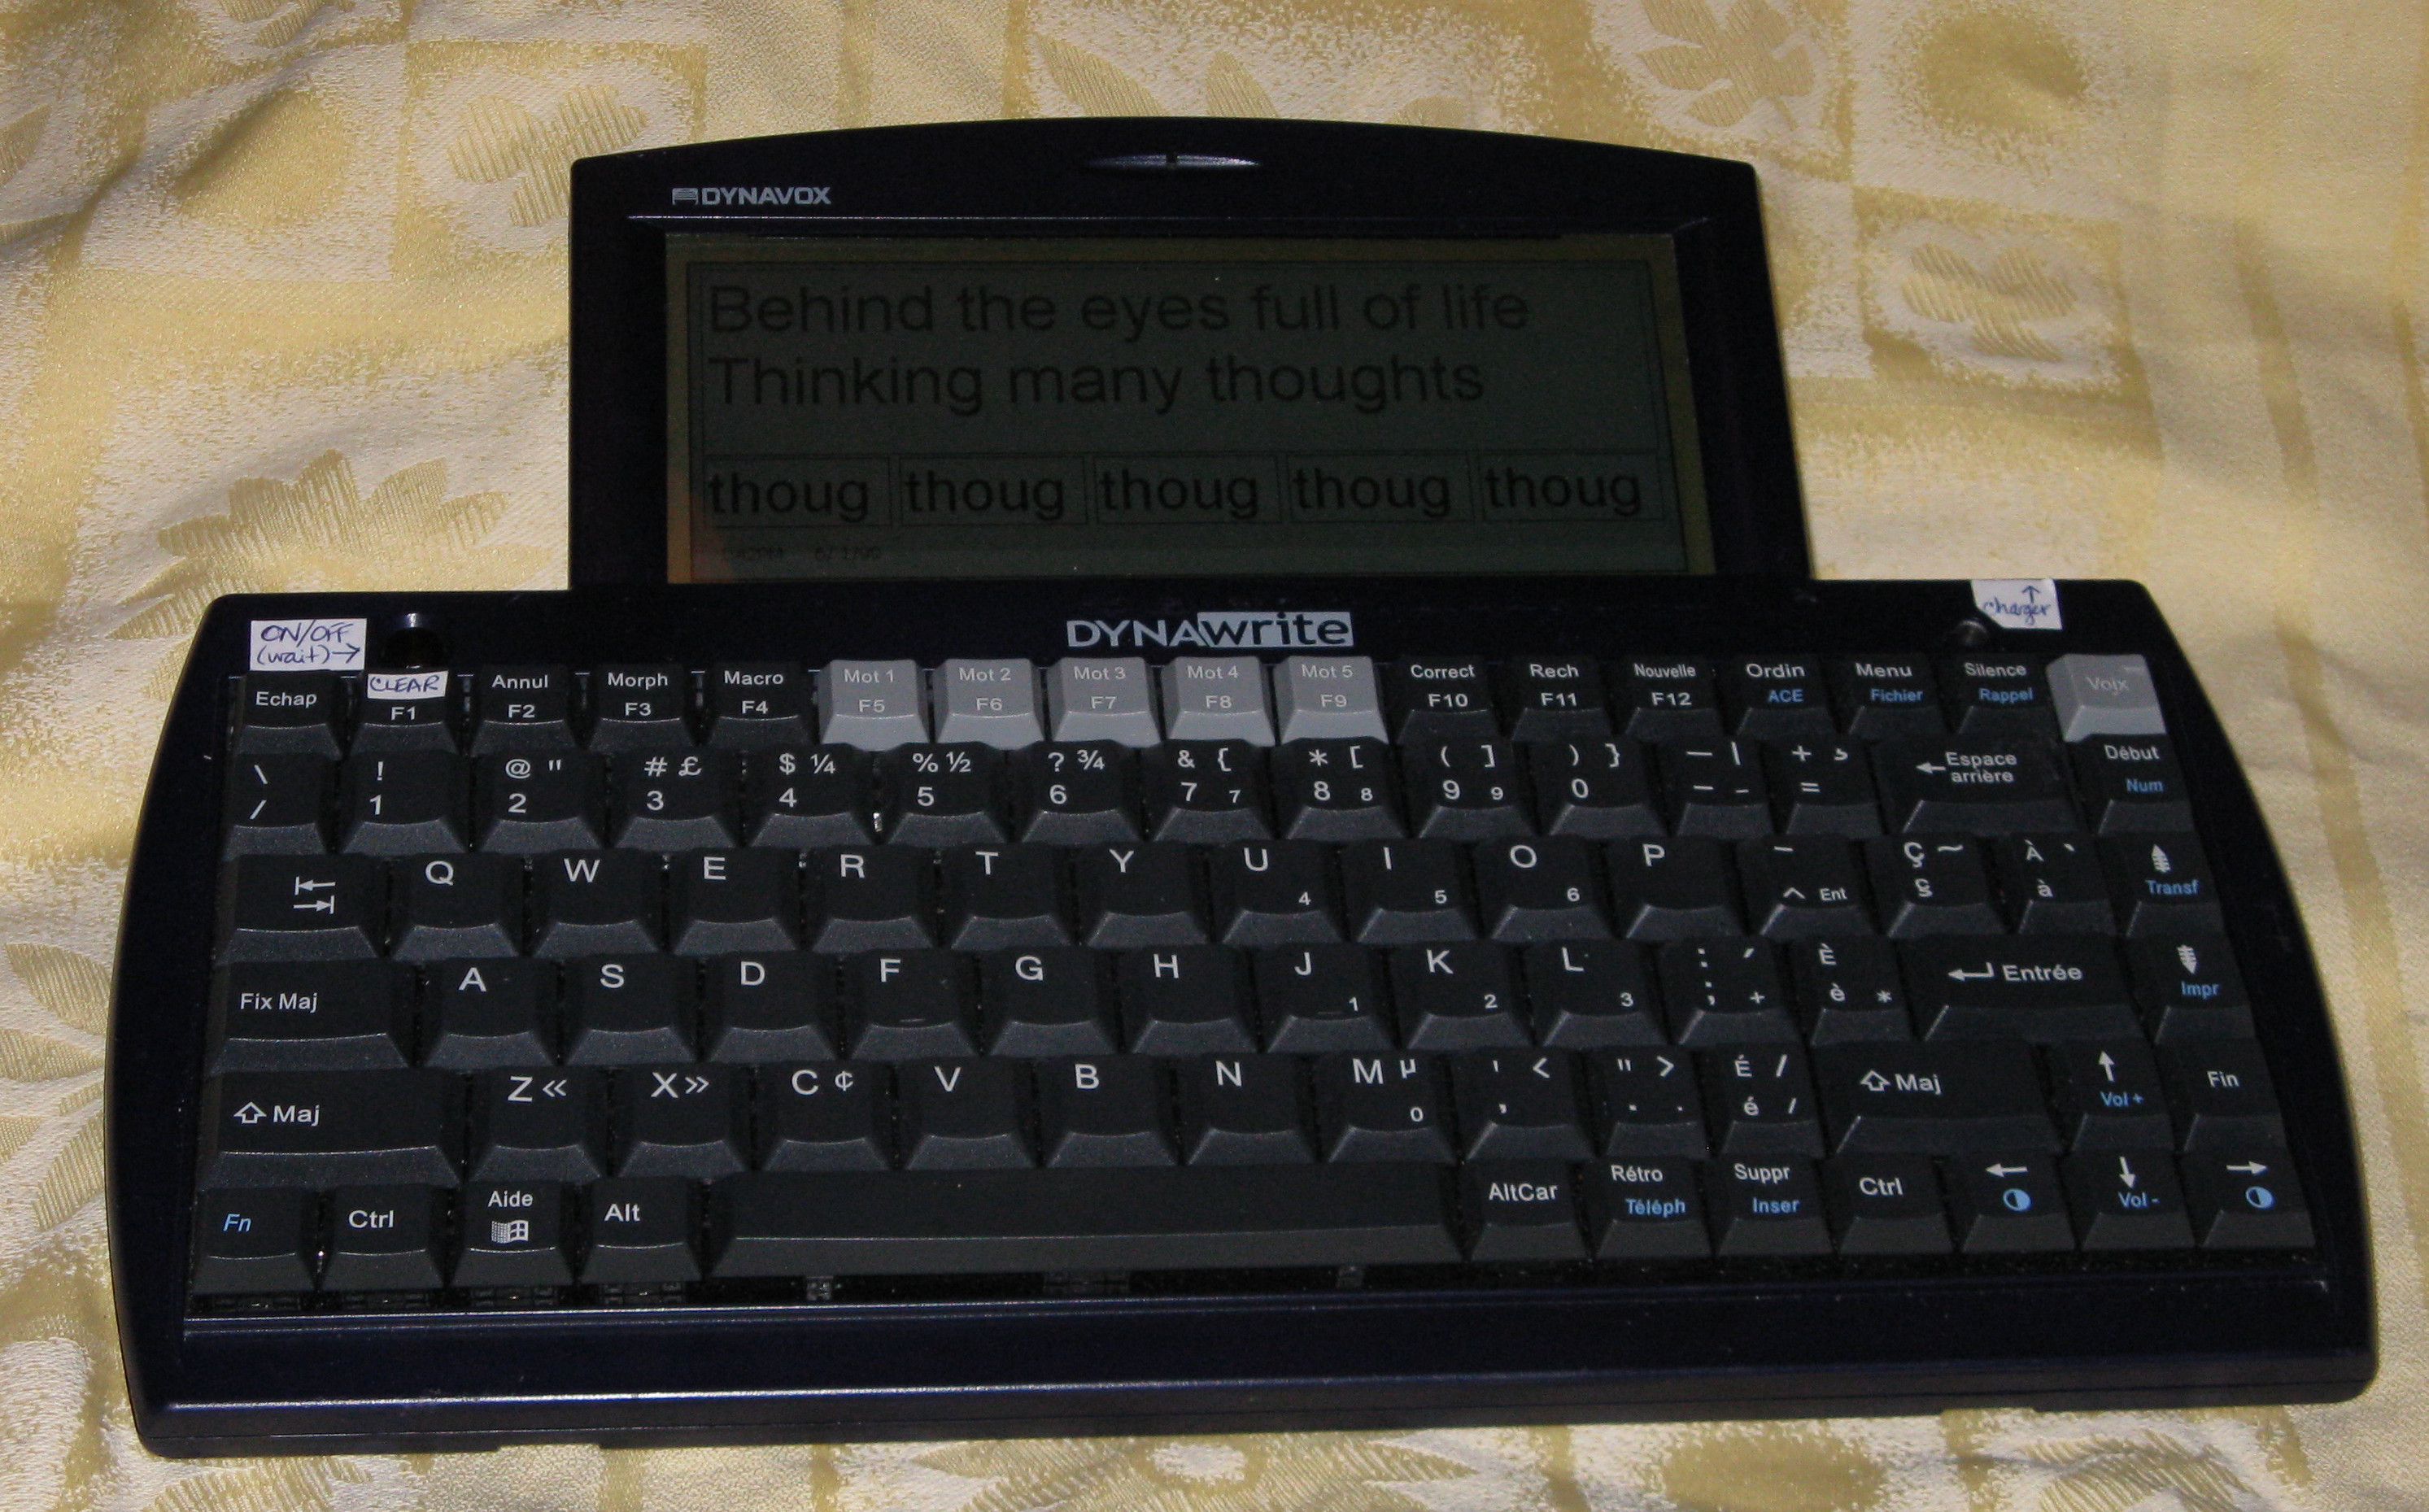  Keyboard of the type used in facilitated communication